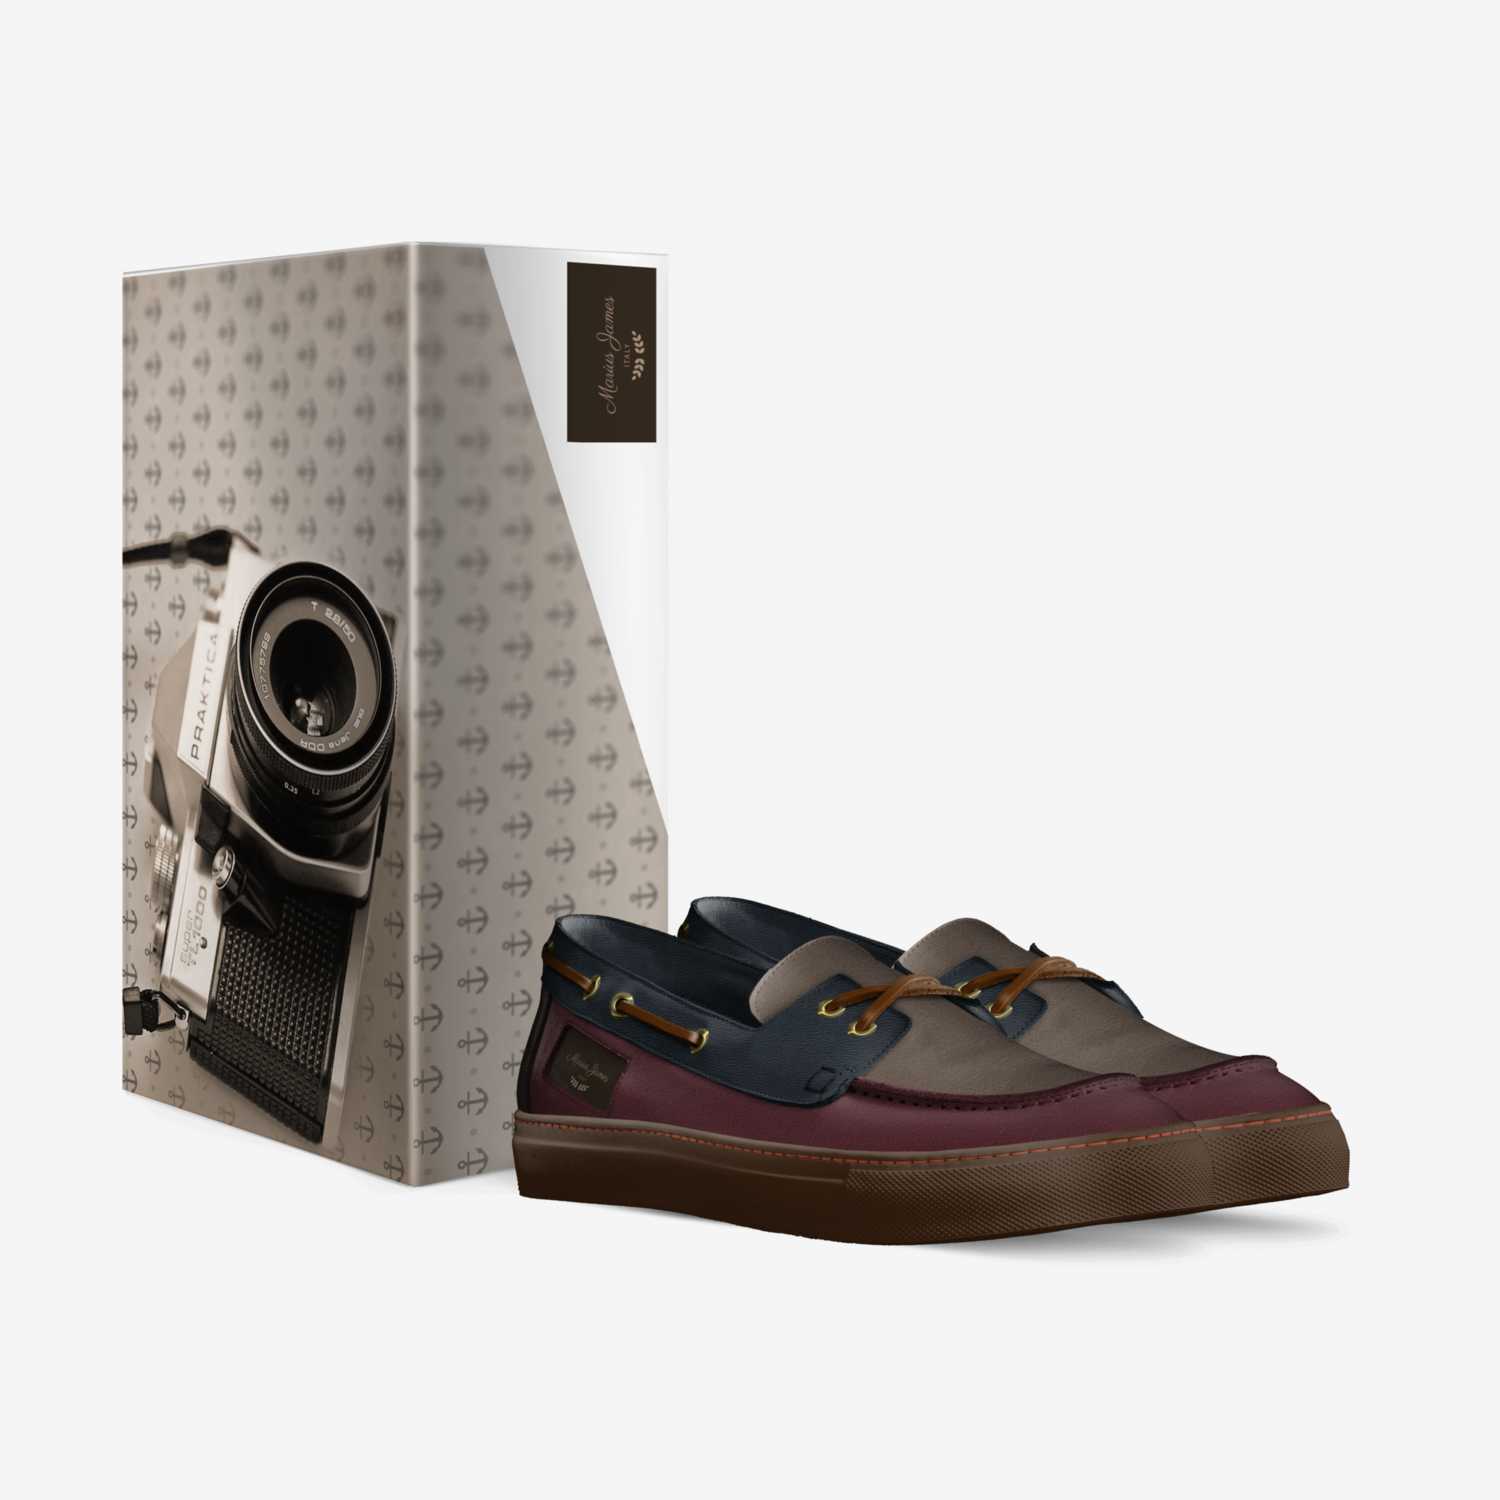 Marius James custom made in Italy shoes by James Rigney | Box view